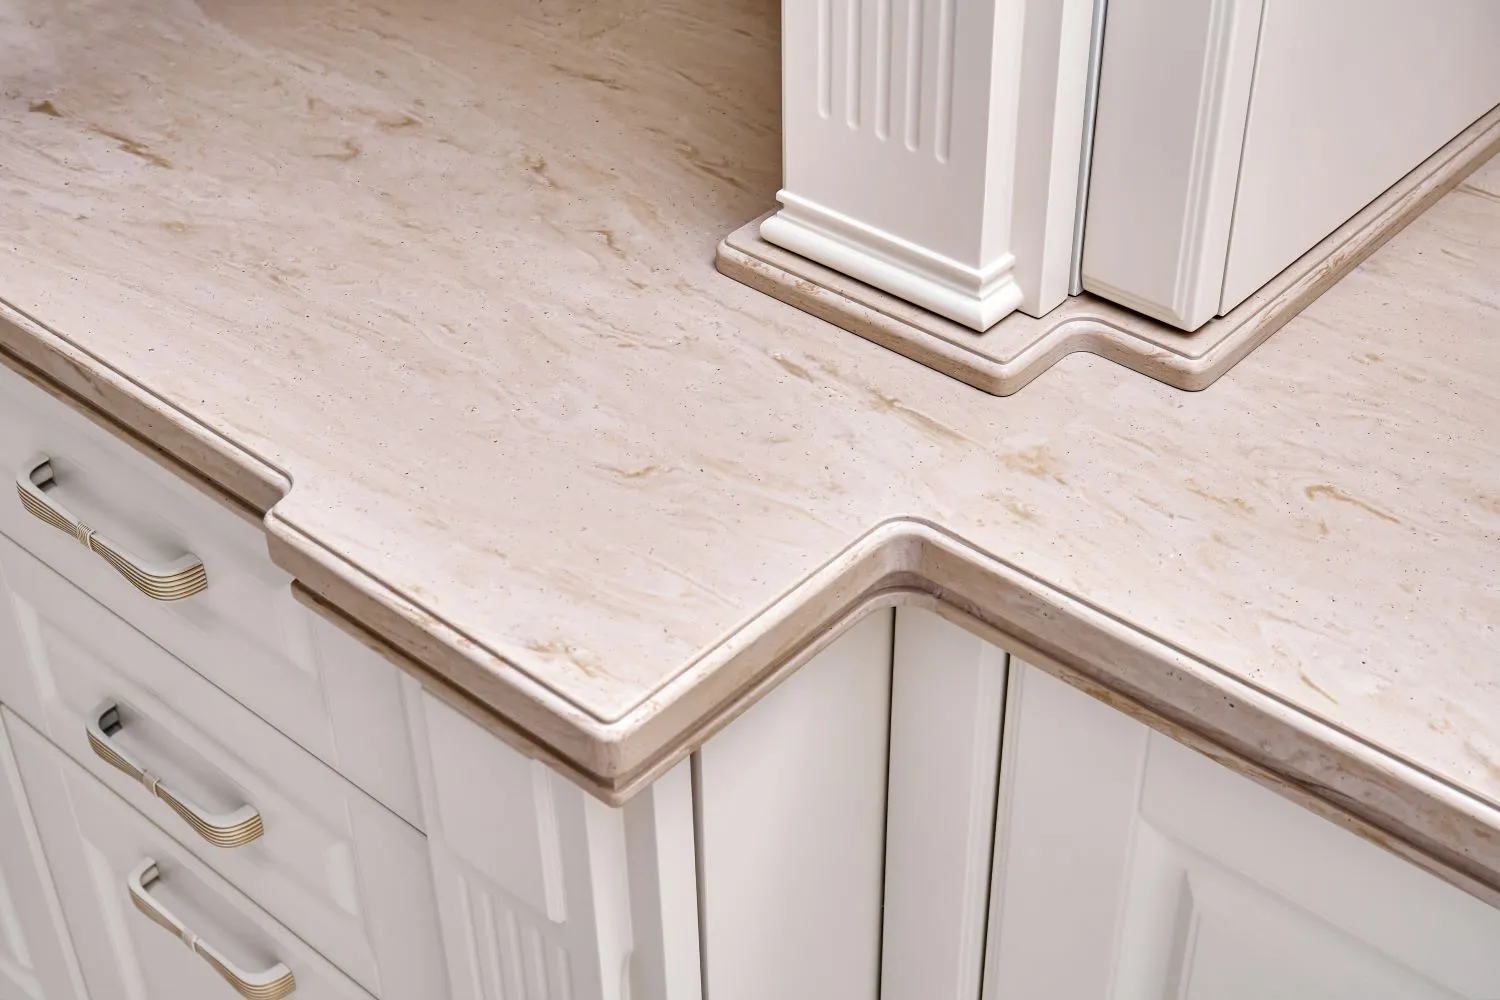 The ability of the ogee edge to improve the appearance of any space makes it very alluring.